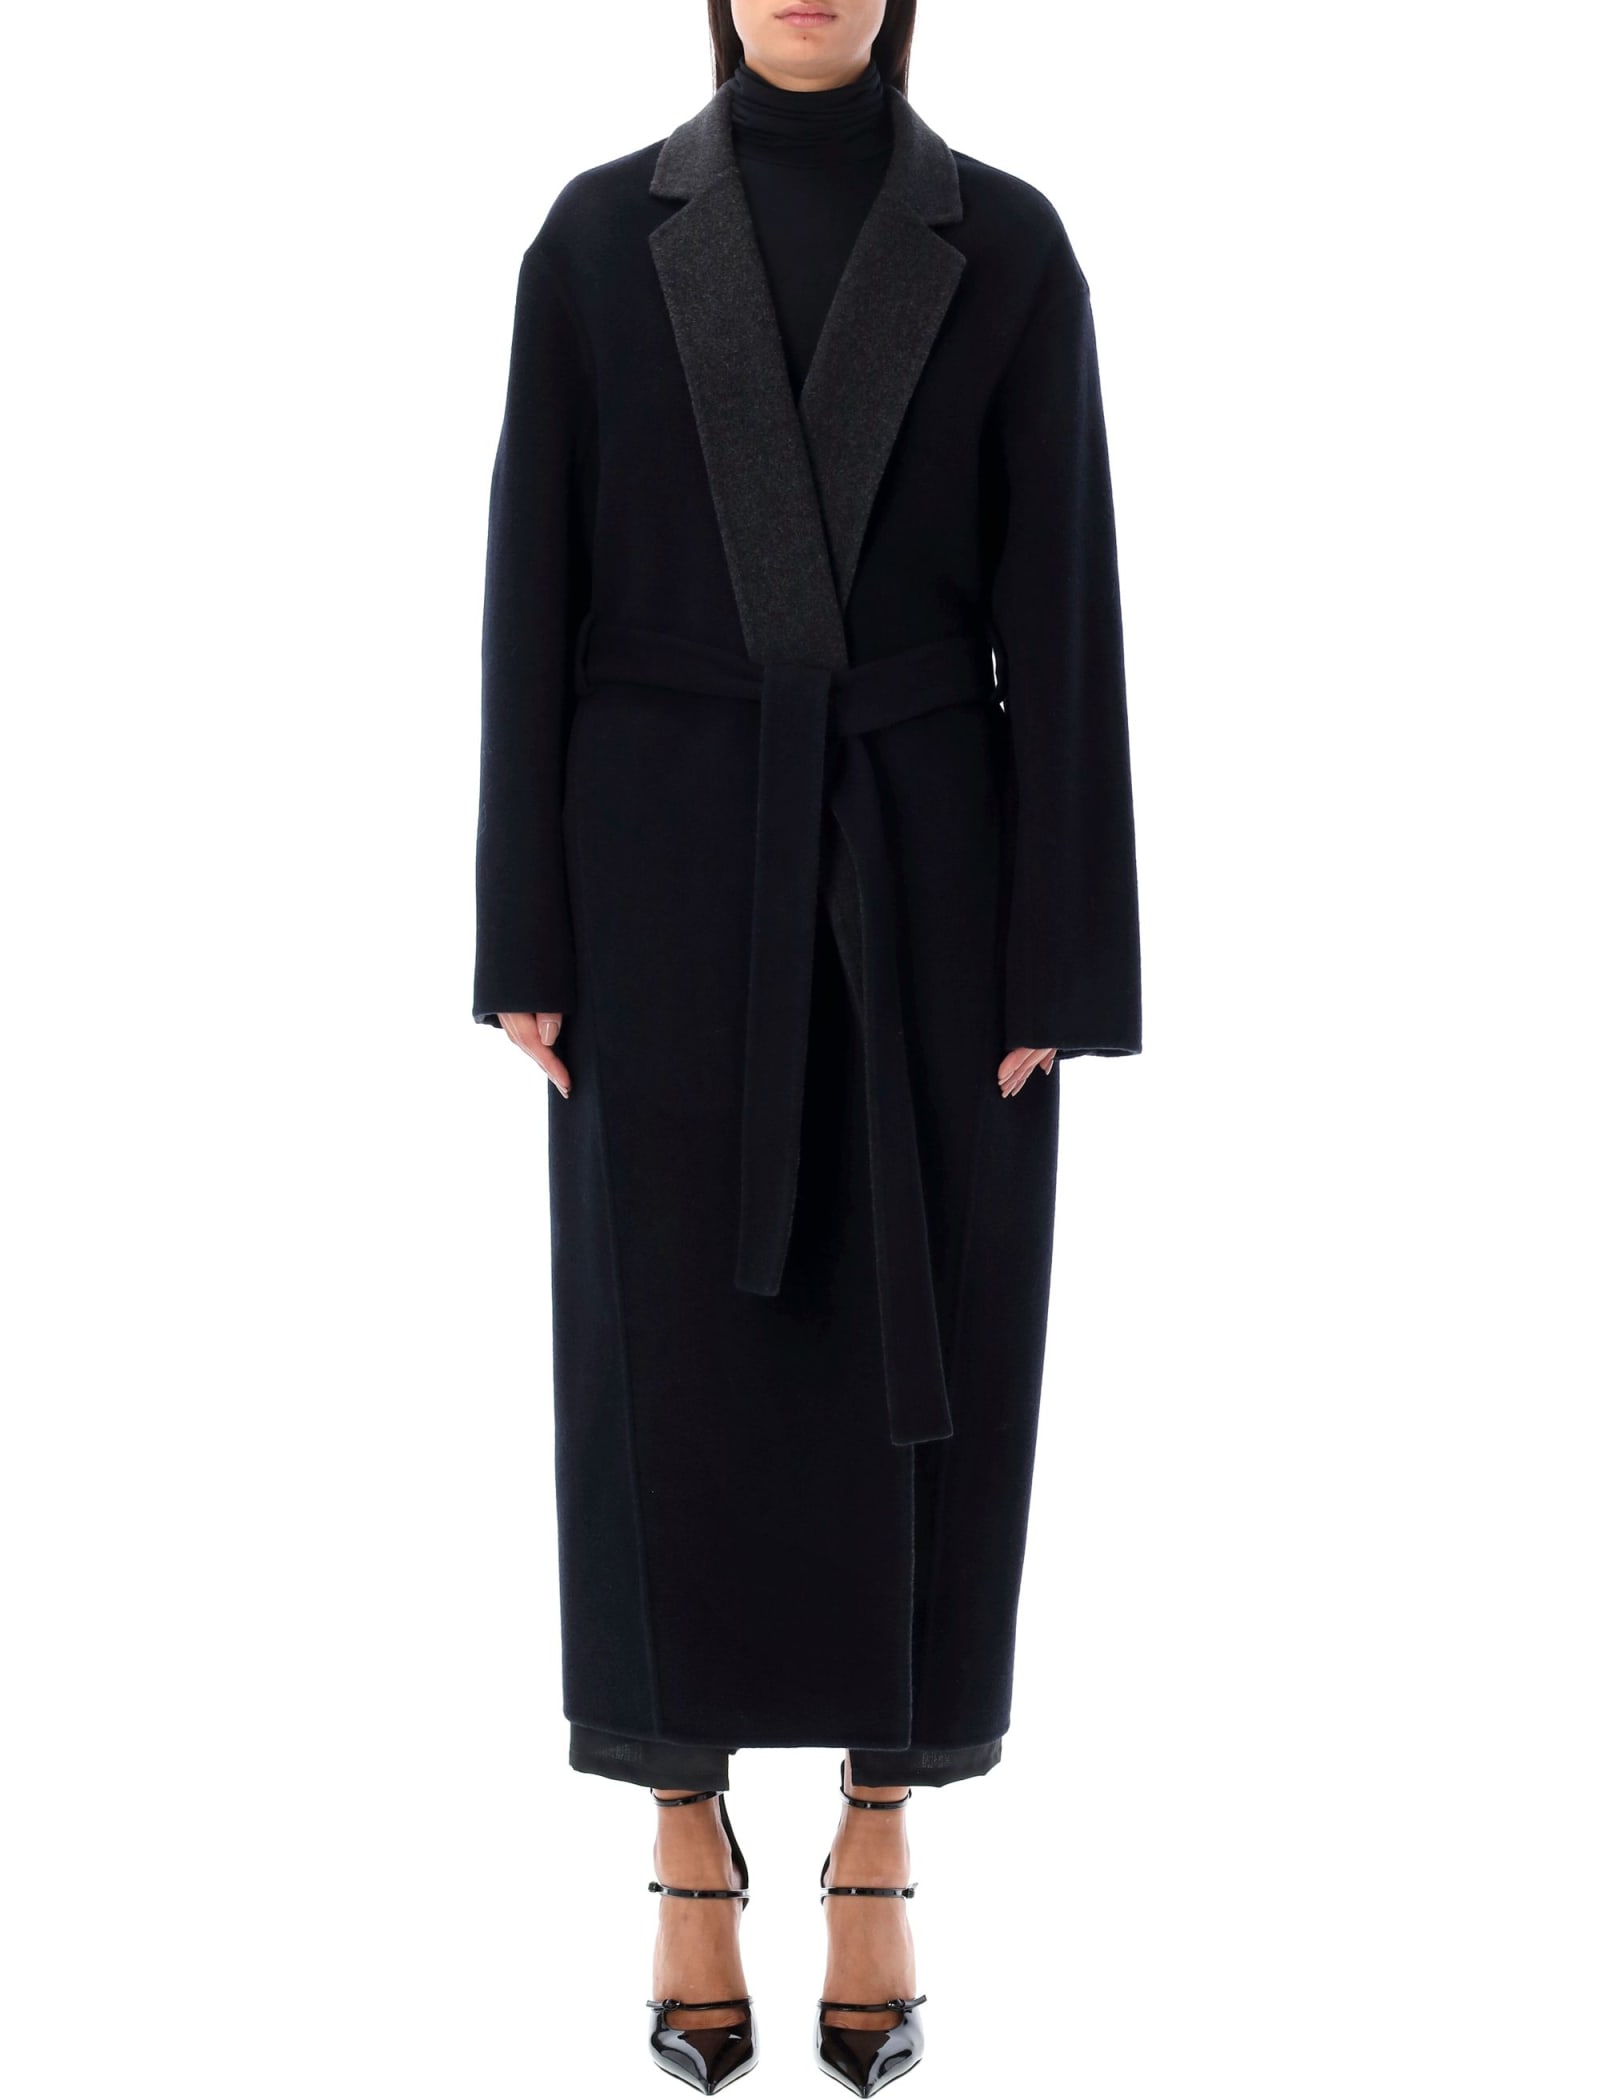 GIVENCHY DOUBLE FACE COAT